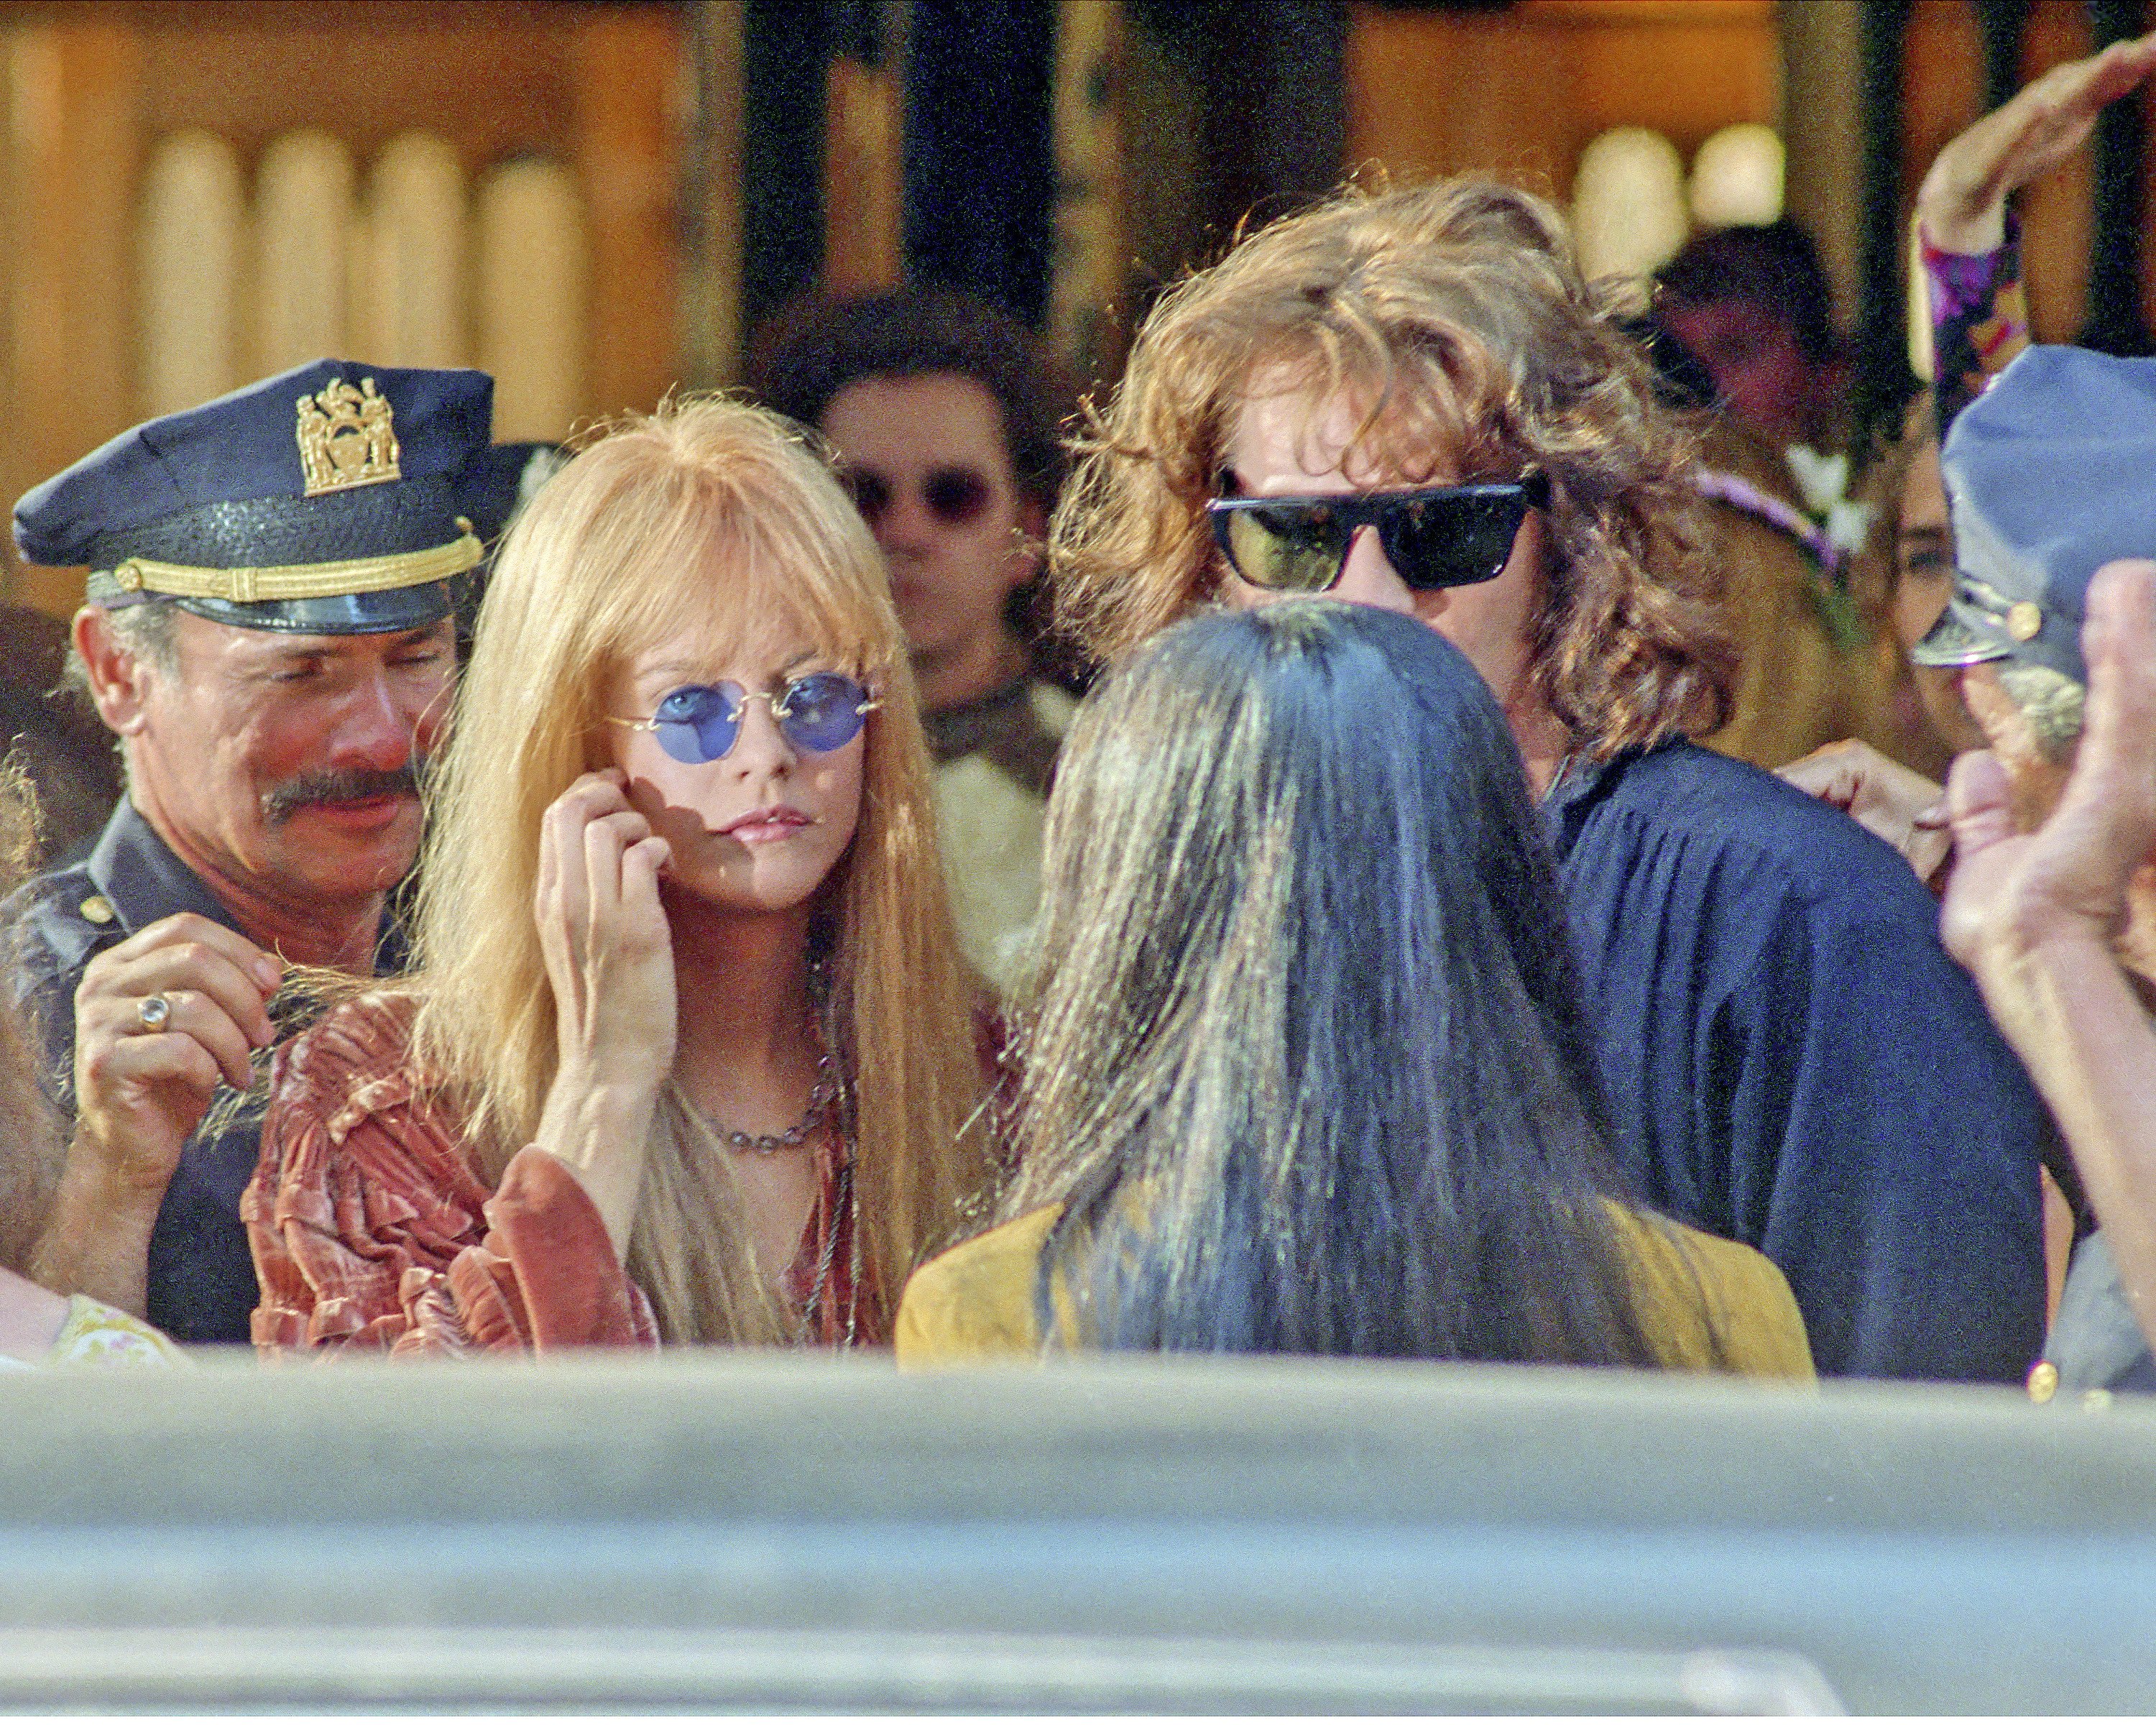 Meg Ryan who plays Pamela Courson, Morrison's companion and Val Kilmer as Jim Morrison who star in movie "The Doors" being filmed in New York. | Source: Getty Images